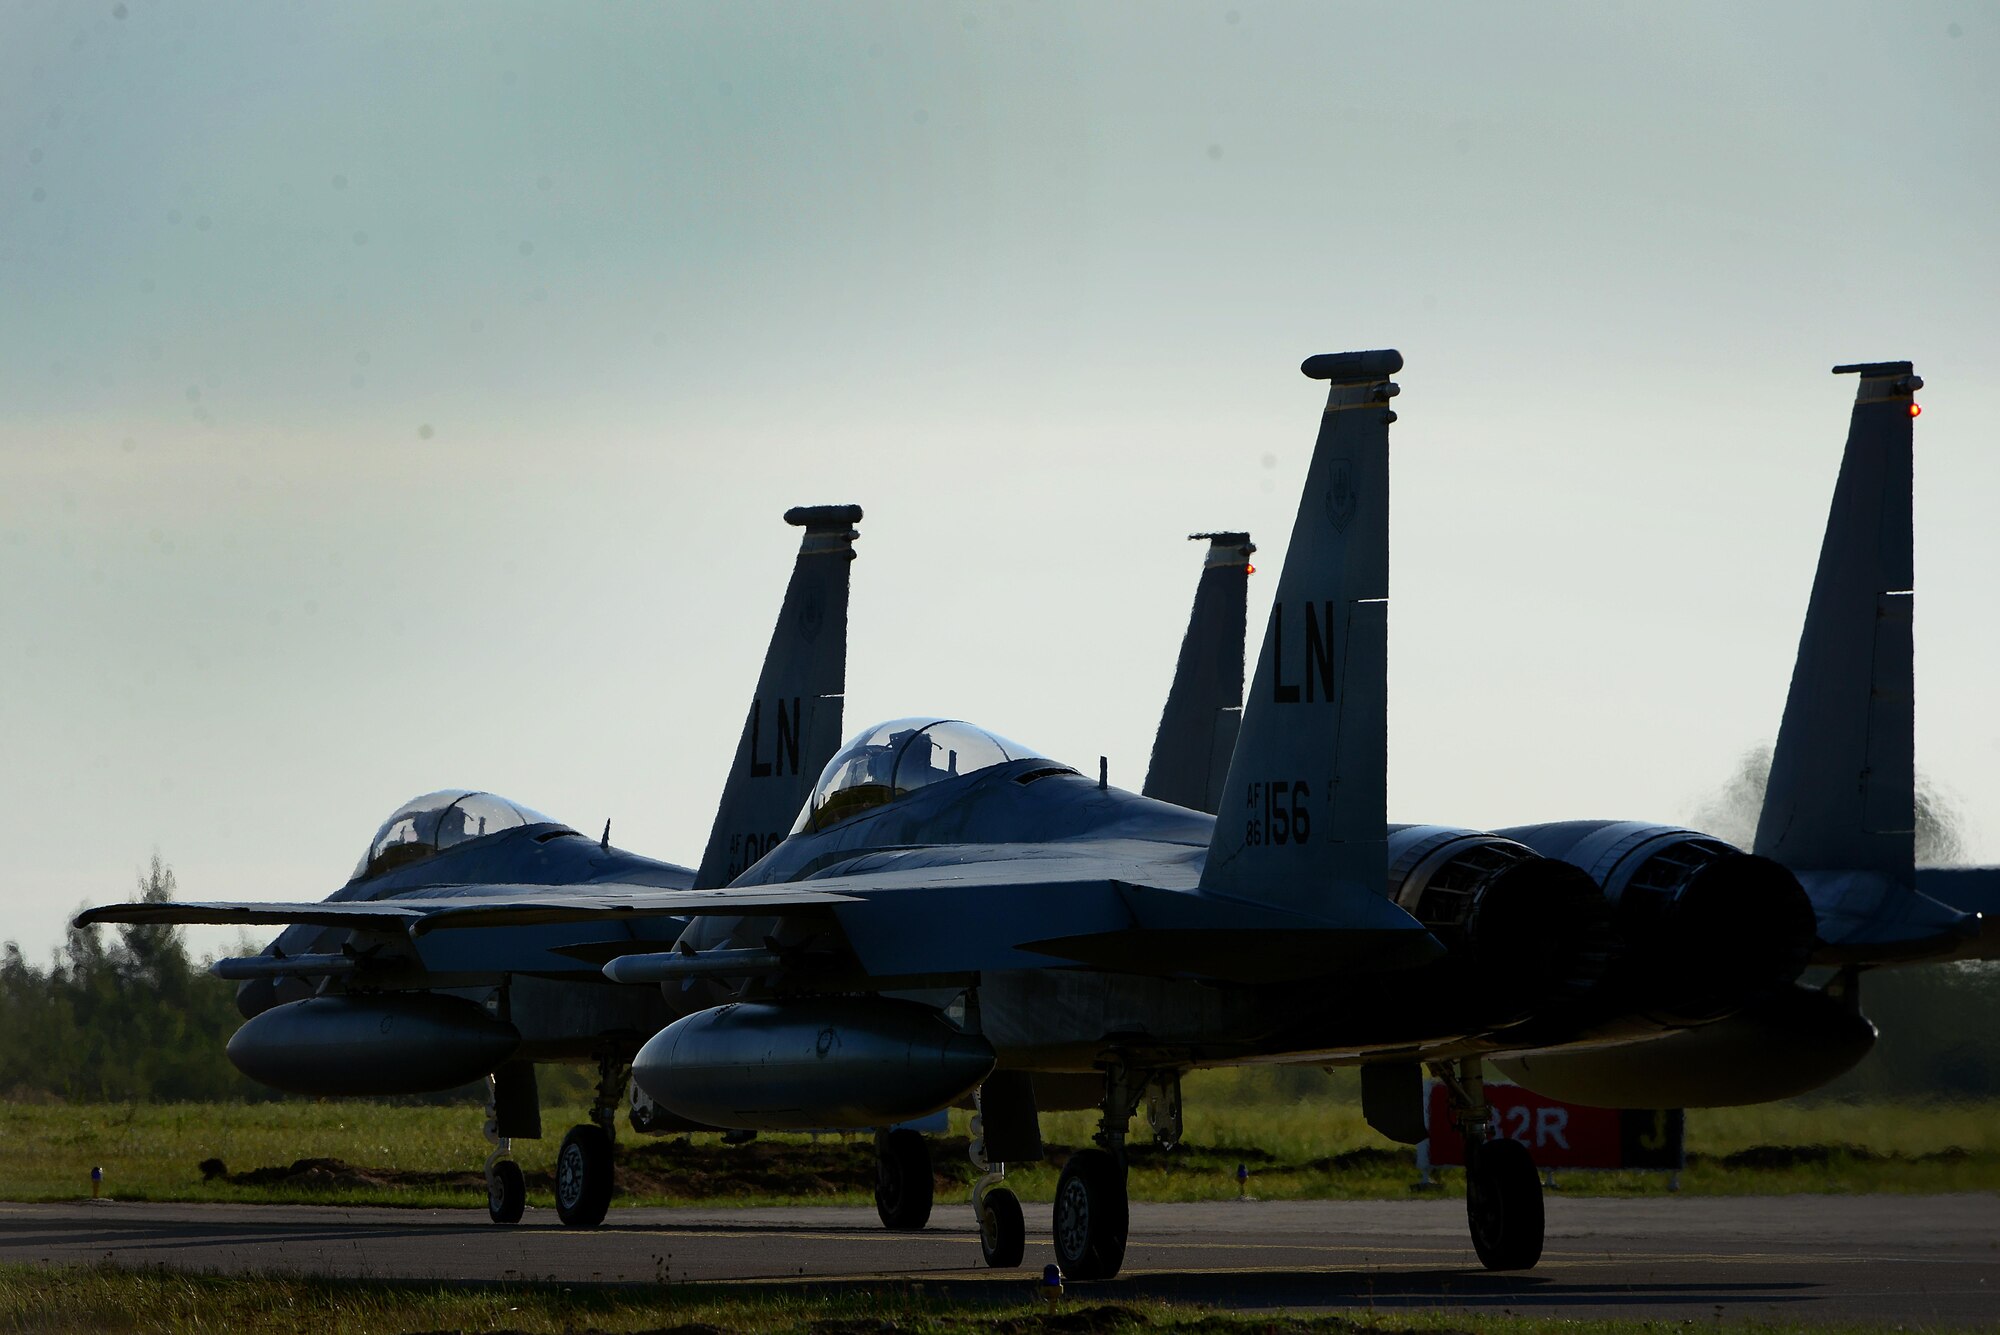 U.S. F-15C Eagles taxi for a sortie in support of the NATO Baltic Air Police mission at Siauliai Air Base, Lithuania, Sept. 8. The 493rd Expeditionary Fighter Squadron has successfully intercepted, interrogated and redirected two aircraft and conducted twenty sorties while serving to protect the skies above the Baltic region. (U.S. Air Force photo/ Tech. Sgt. Matthew Plew)